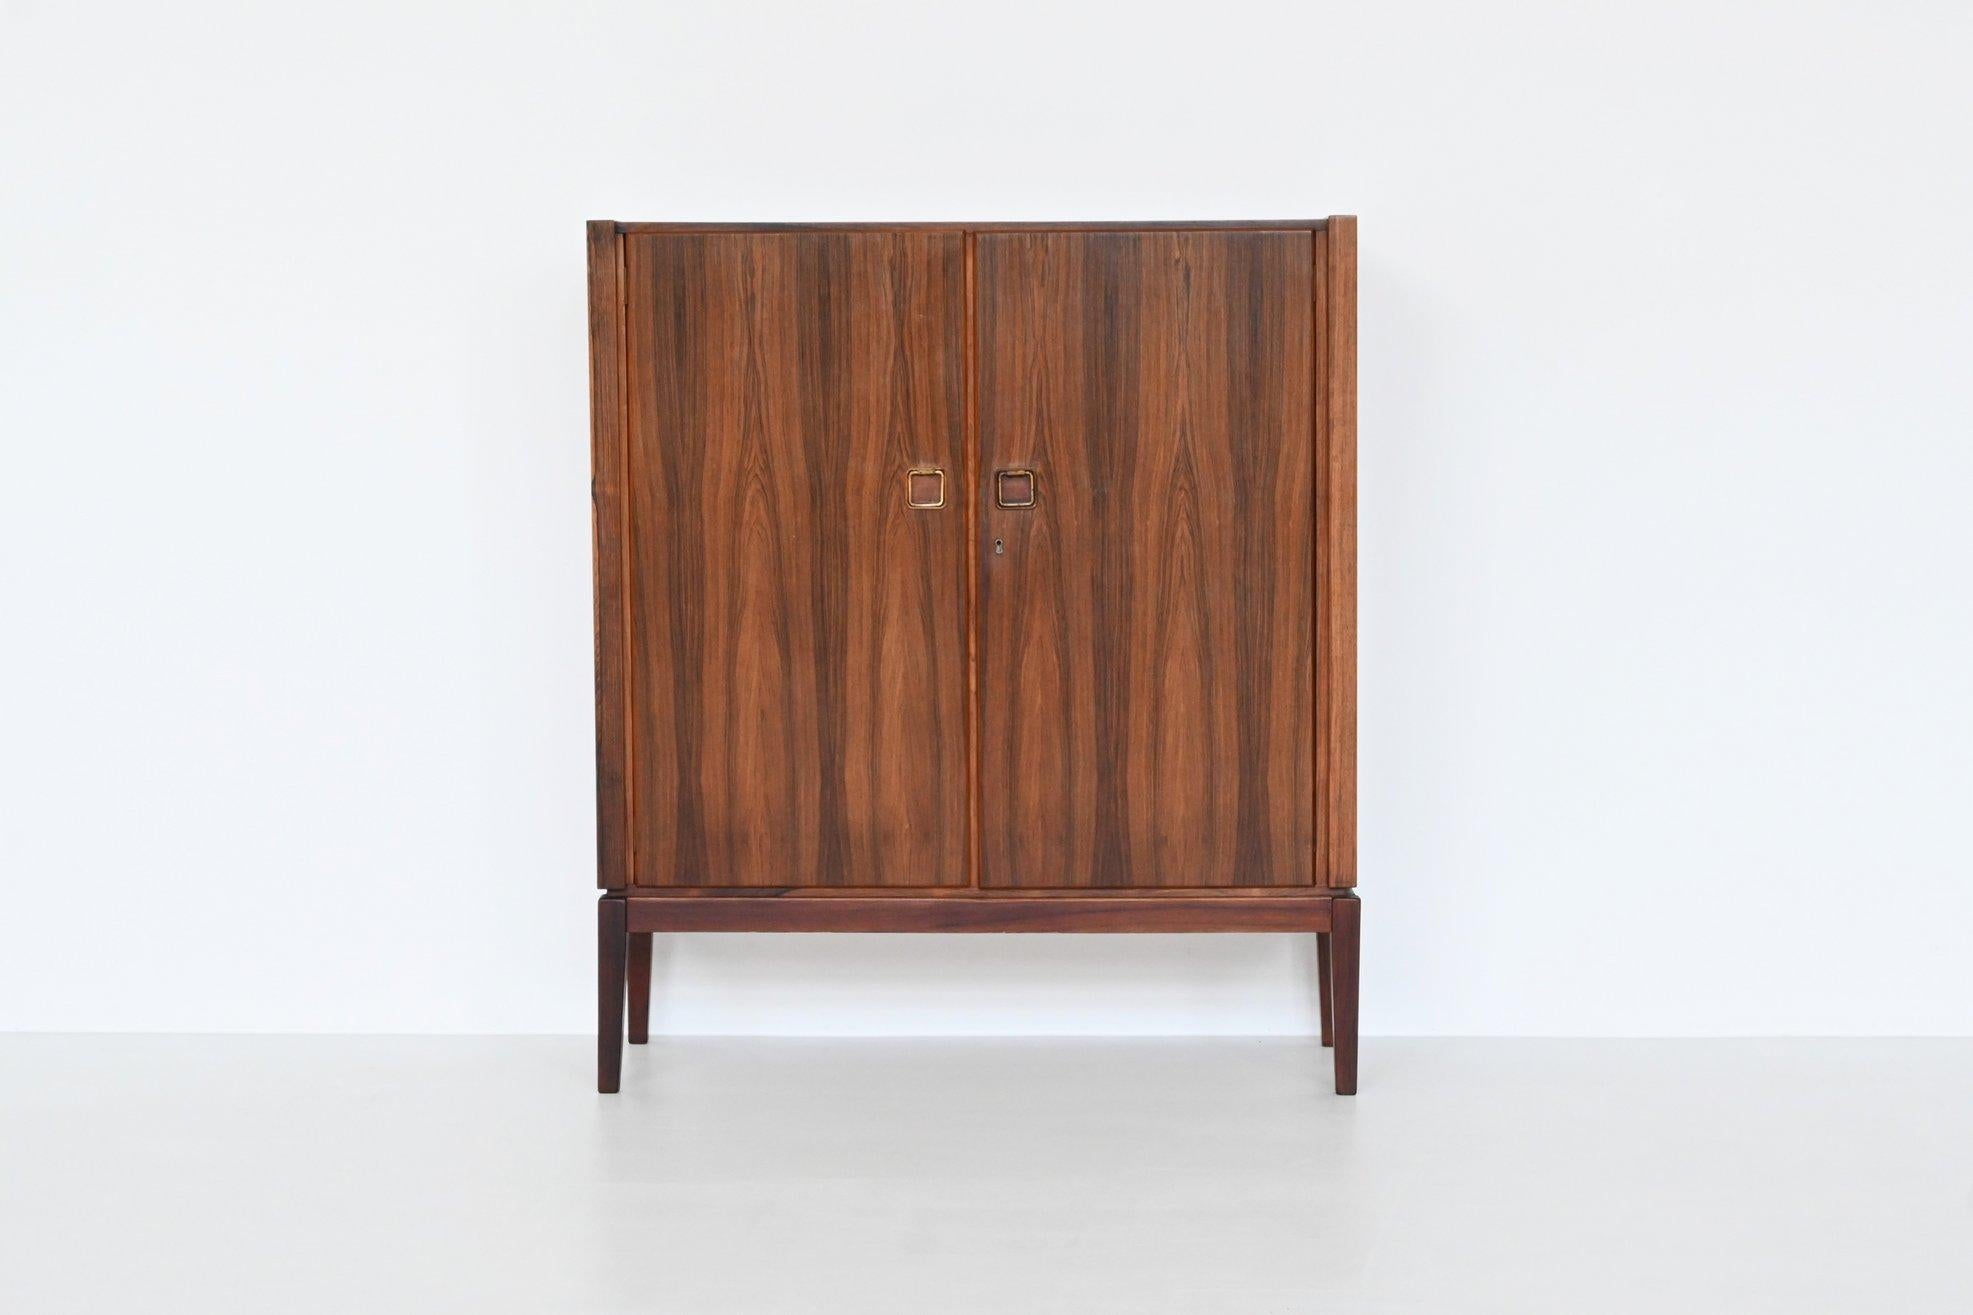 Beautiful buffet manufactured by Topform, The Netherlands 1960. This very nice slim shaped cabinet is made of beautifully grained veneered rosewood with solid legs. Even the inside door panels are beautiful flamed. It has two doors with four shelves